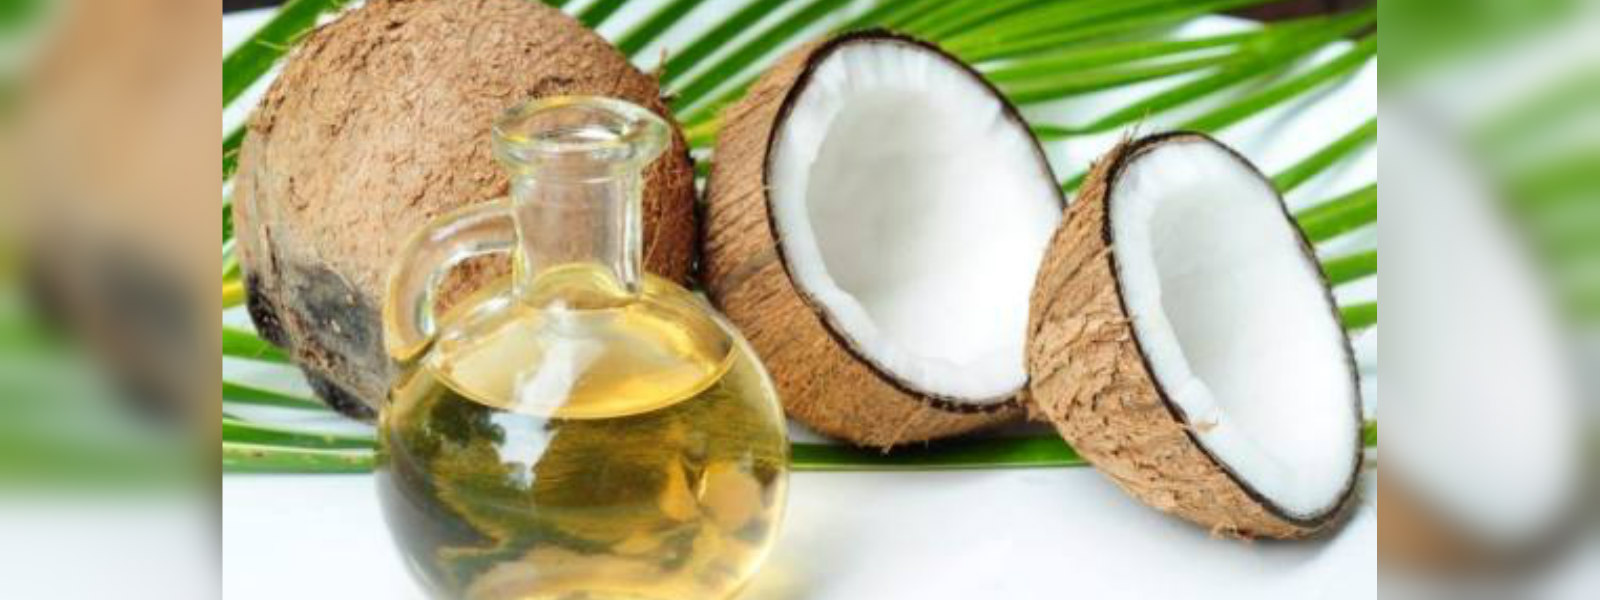 230MT of Substandard Coconut oil to be re-exported